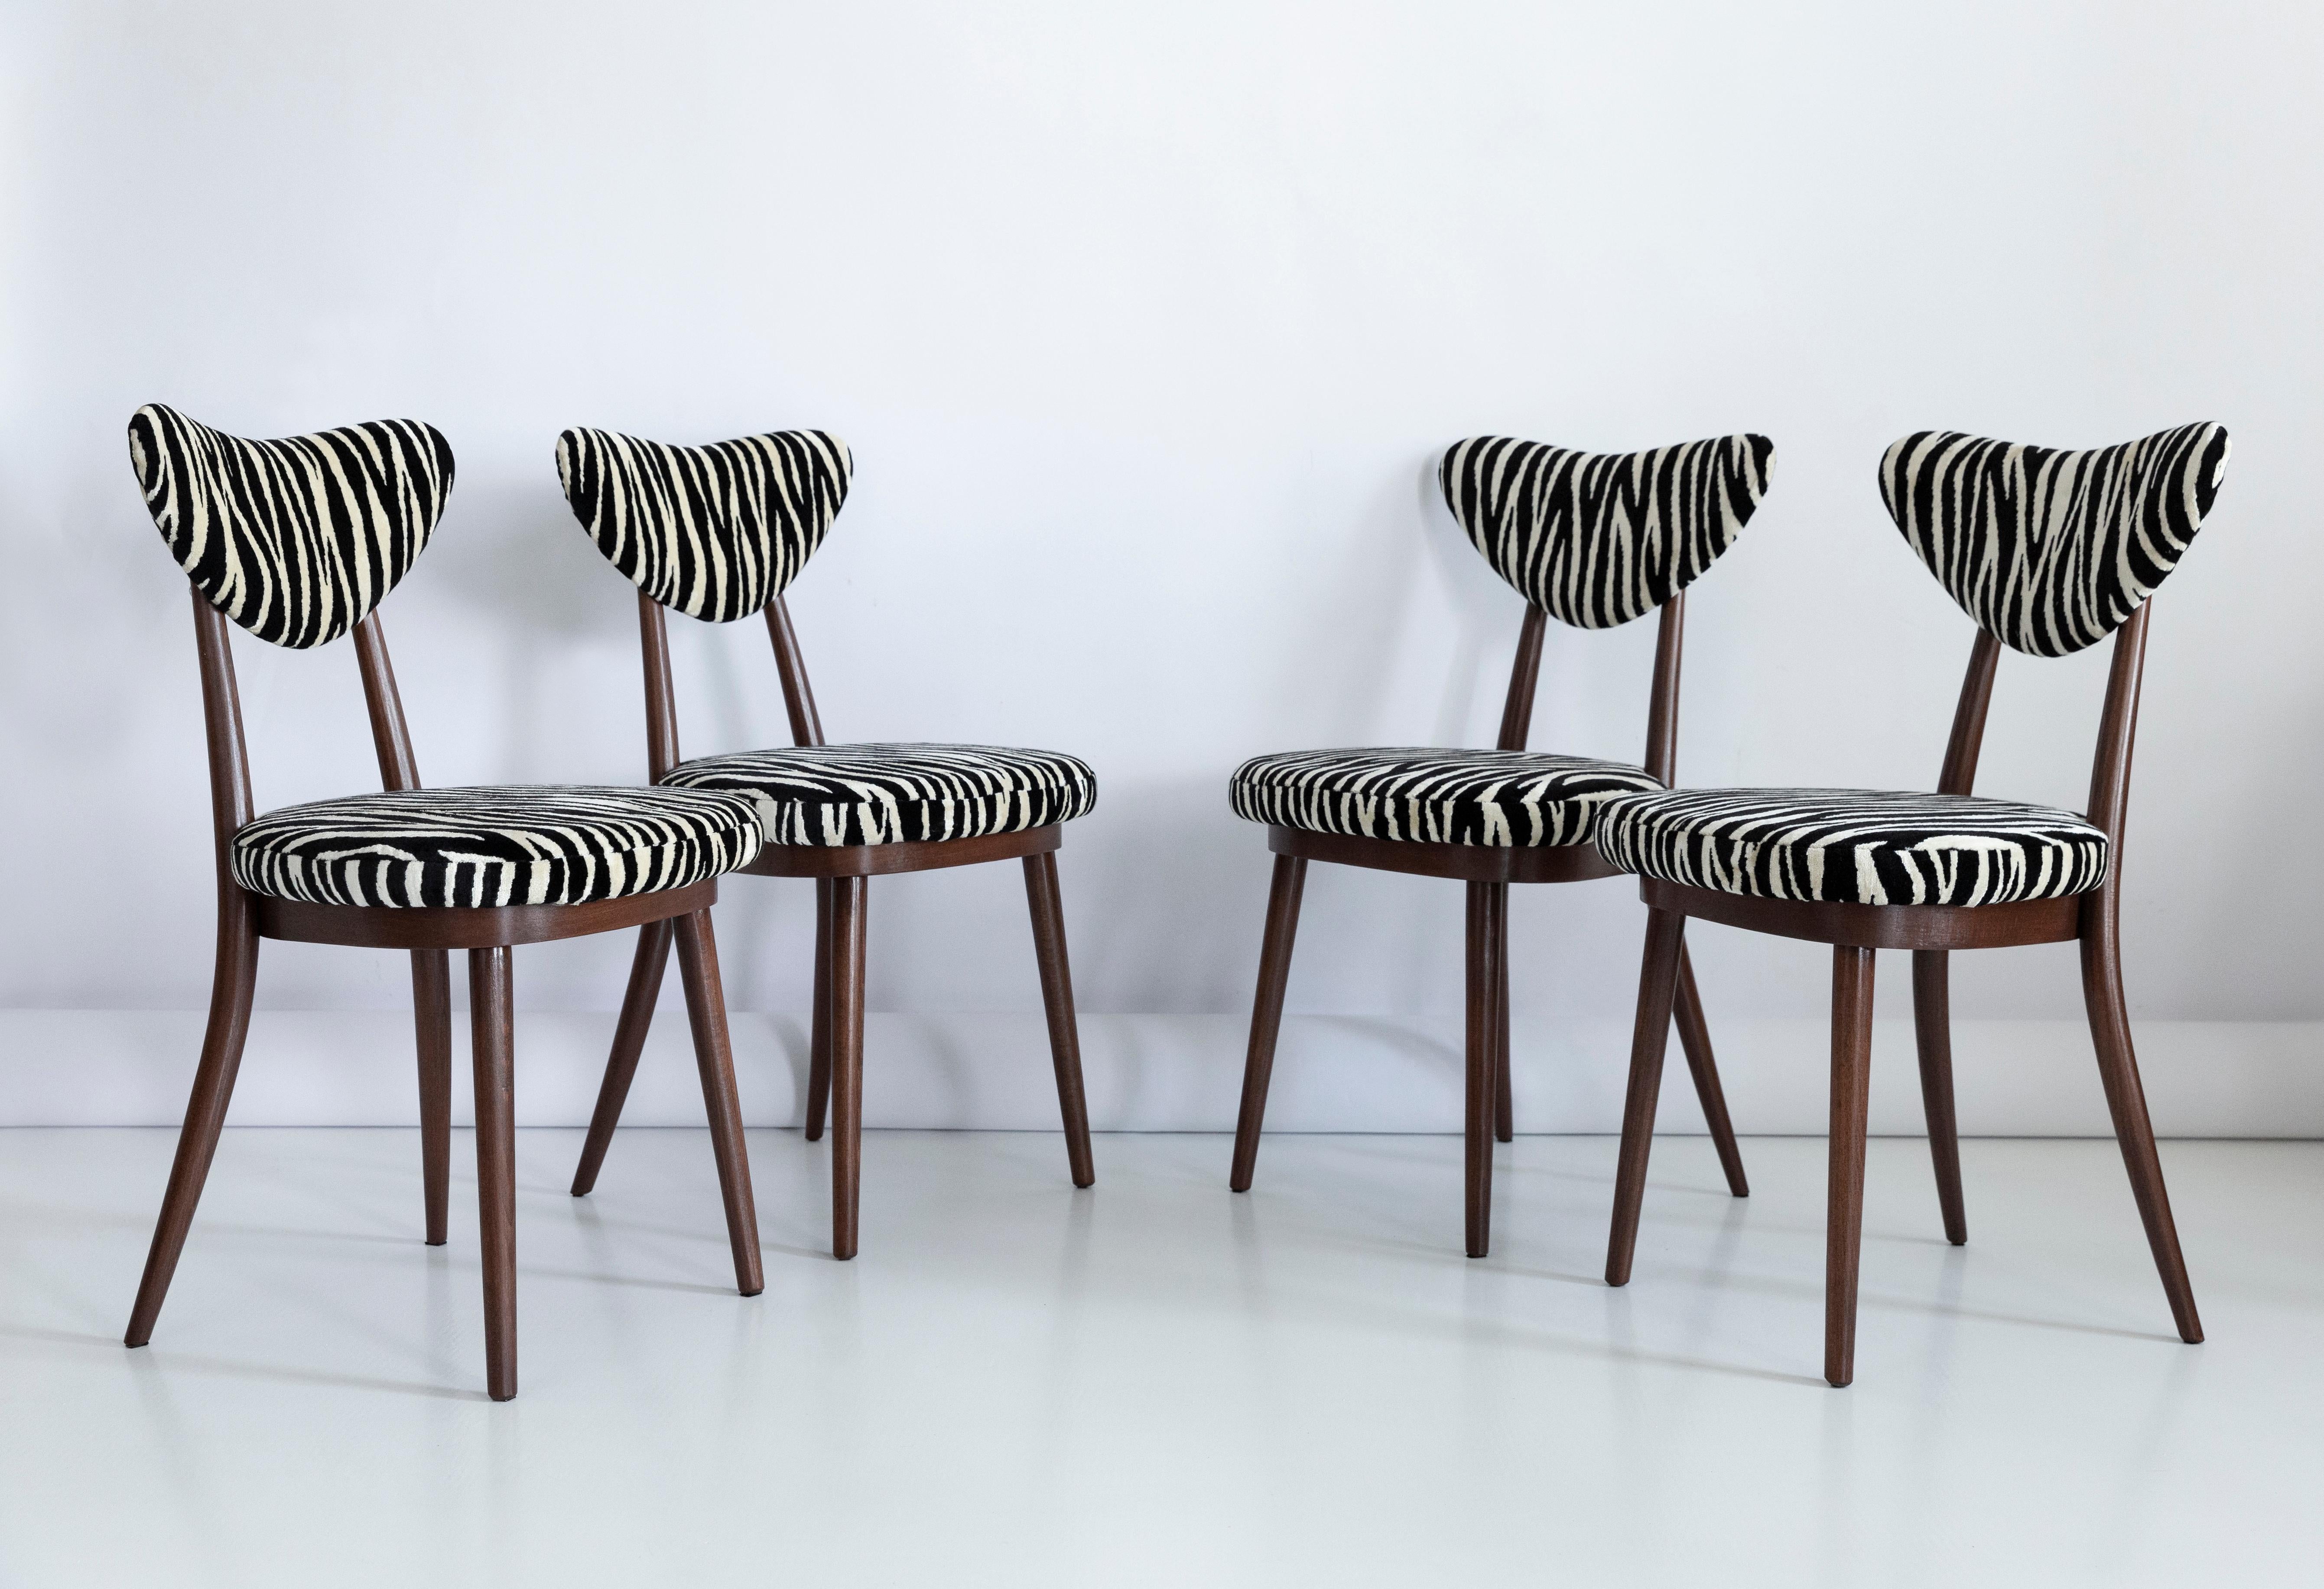 Hand-Crafted Six Midcentury Zebra Black White Heart Chairs, Hollywood Regency, Poland, 1960s For Sale